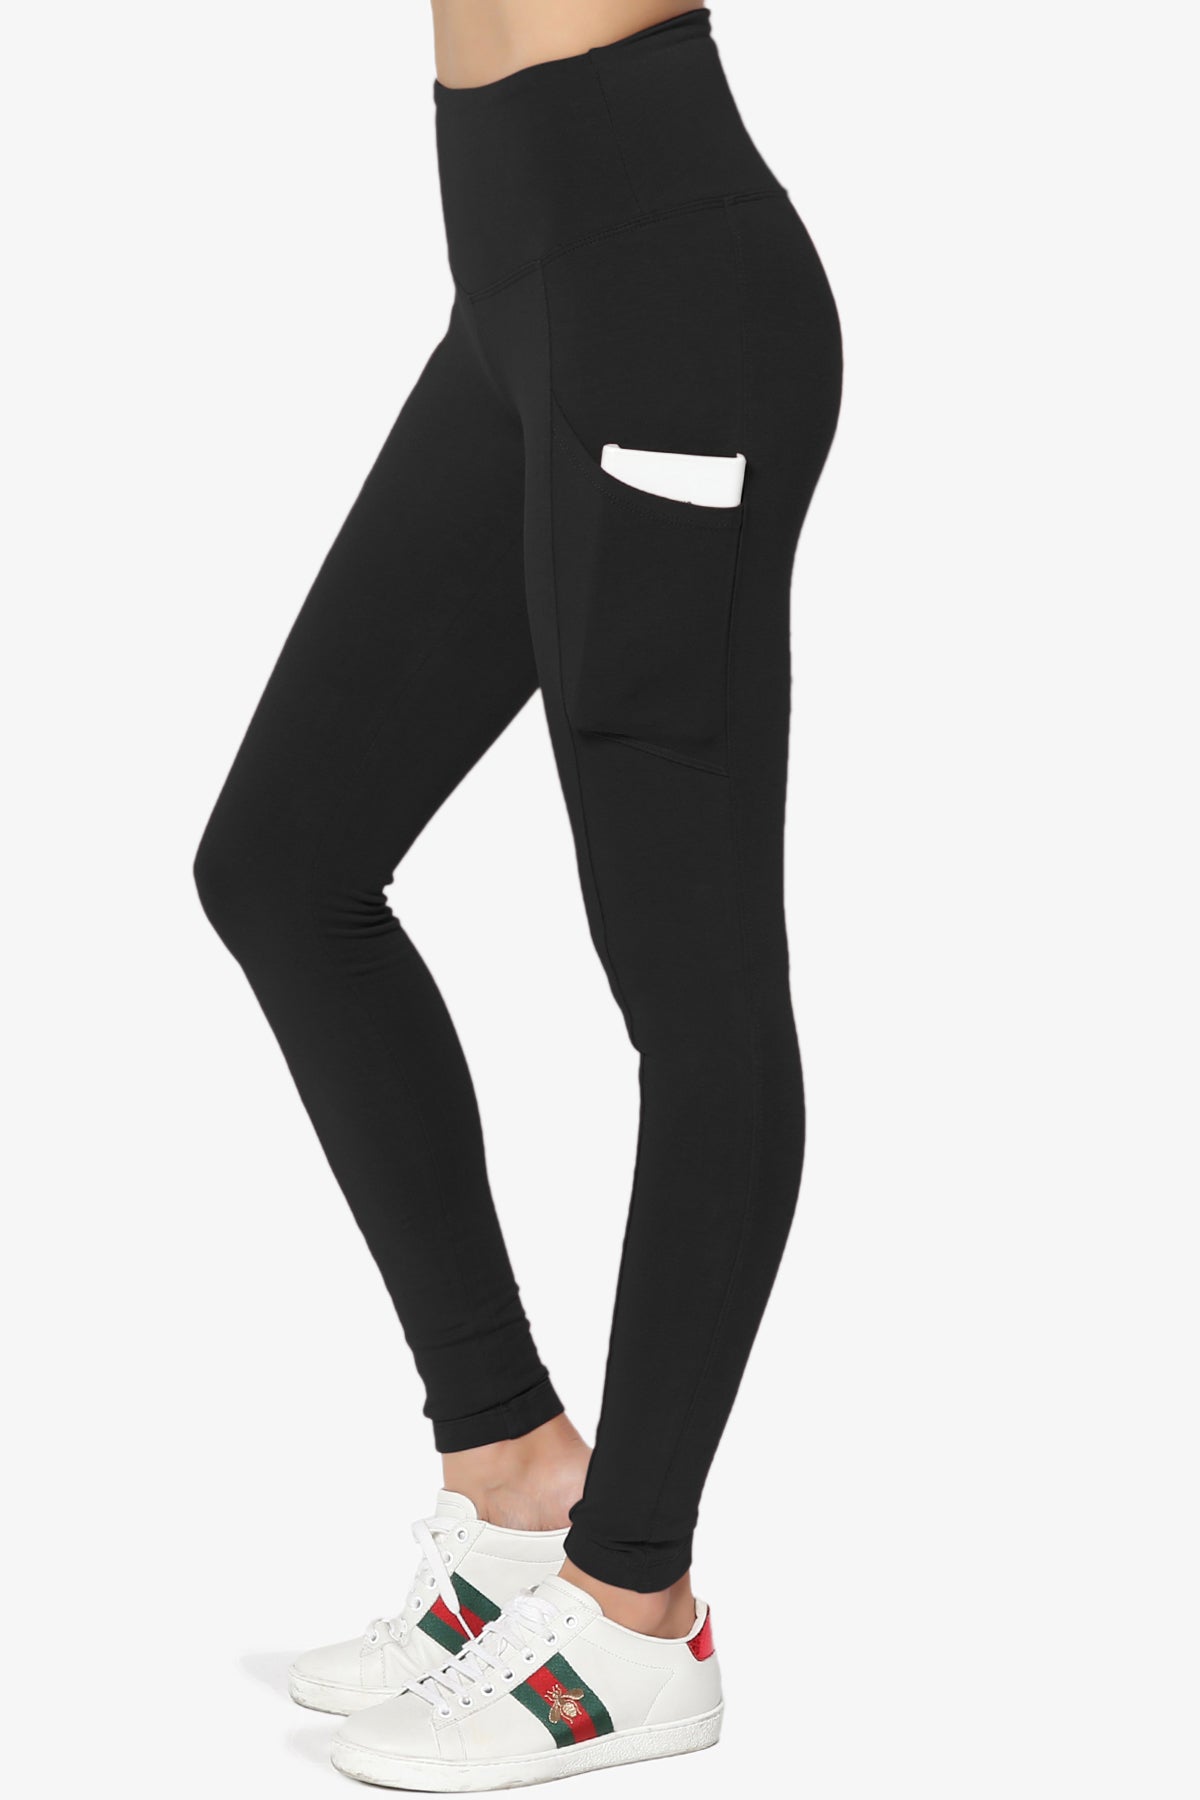 Ansley Luxe Cotton Leggings with Pockets BLACK_1